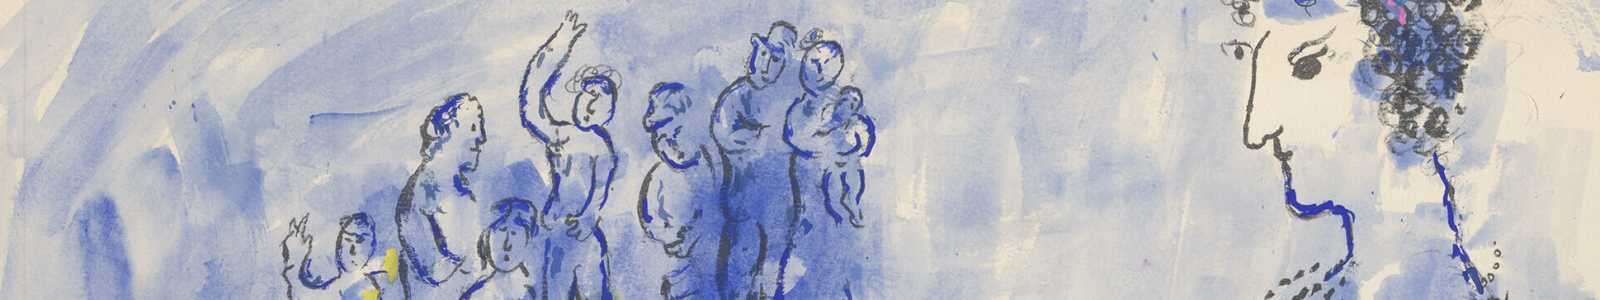 Marc Chagall, Colour of Life: Prints and Artist's Books Formerly from the Artist's Estate